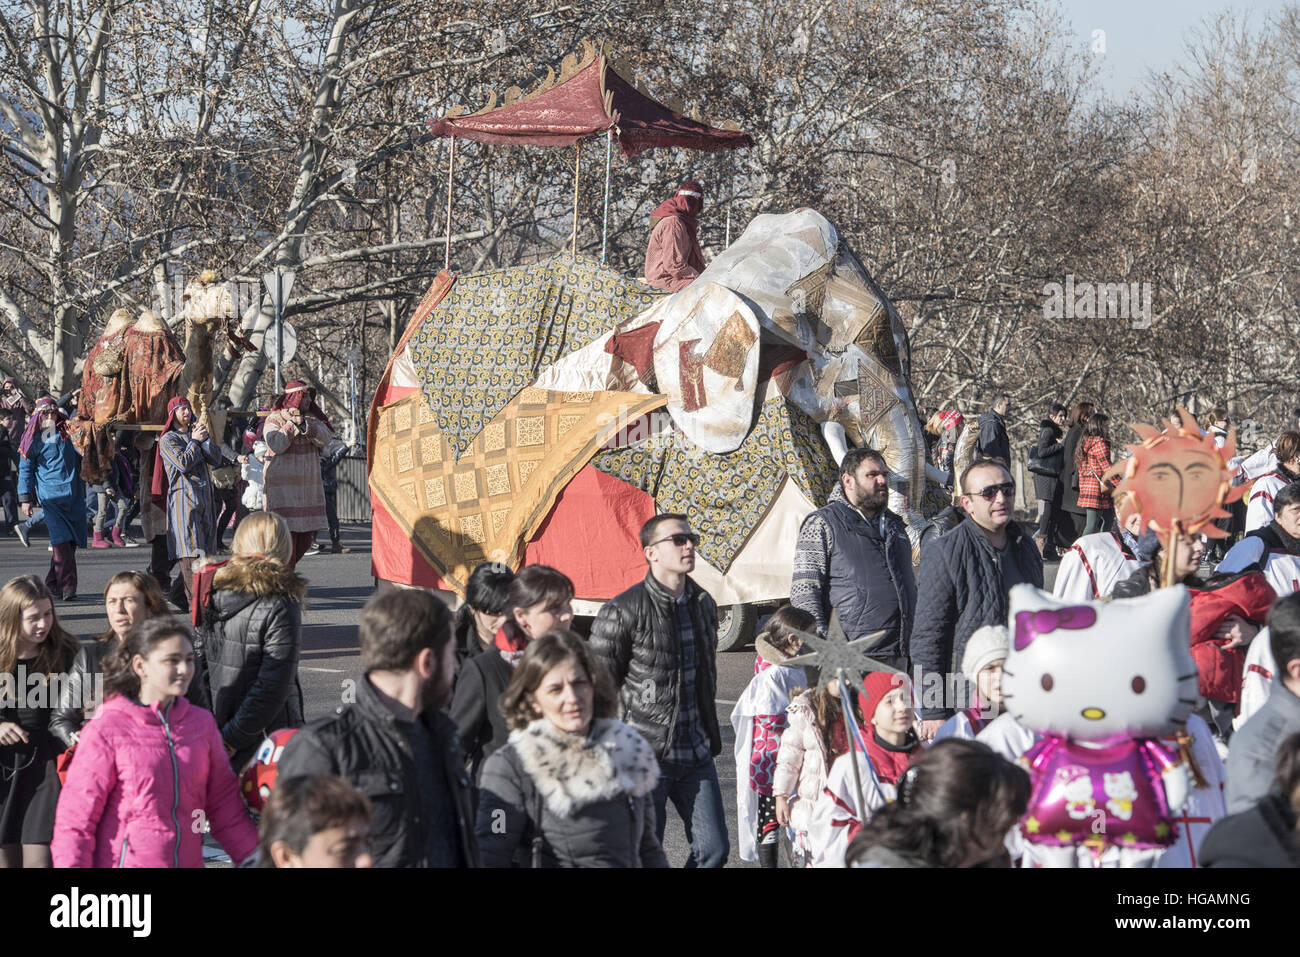 Tbilisi, Georgia. 7th Jan, 2016. Georgian people march during Alilo, a  religious procession, to celebrate the Orthodox Christmas in Tbilisi,  capital of Georgia, on Jan. 7, 2016. Georgians celebrate Christmas on Jan.